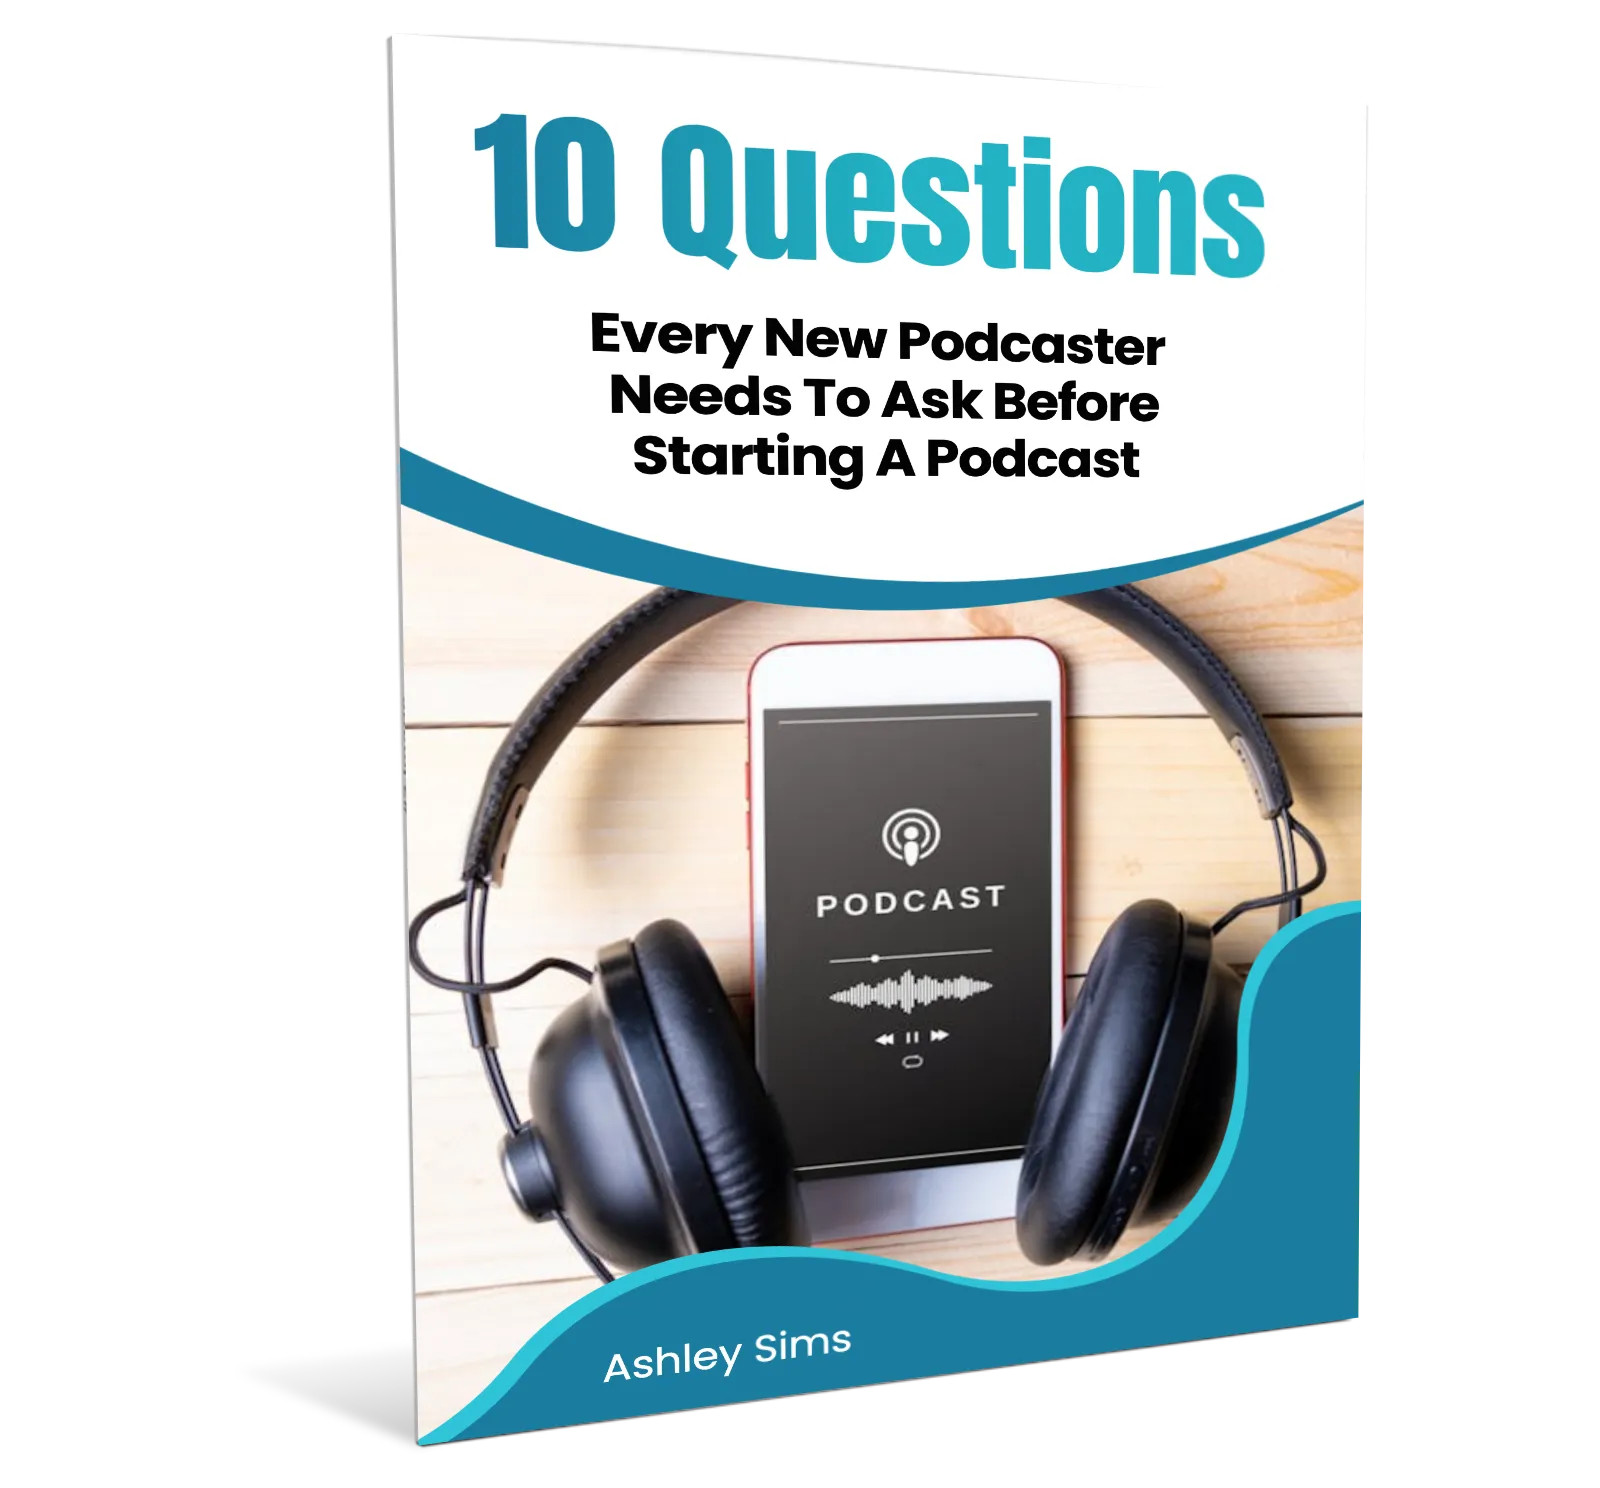 10 Questions Every New Podcaster Needs To Ask